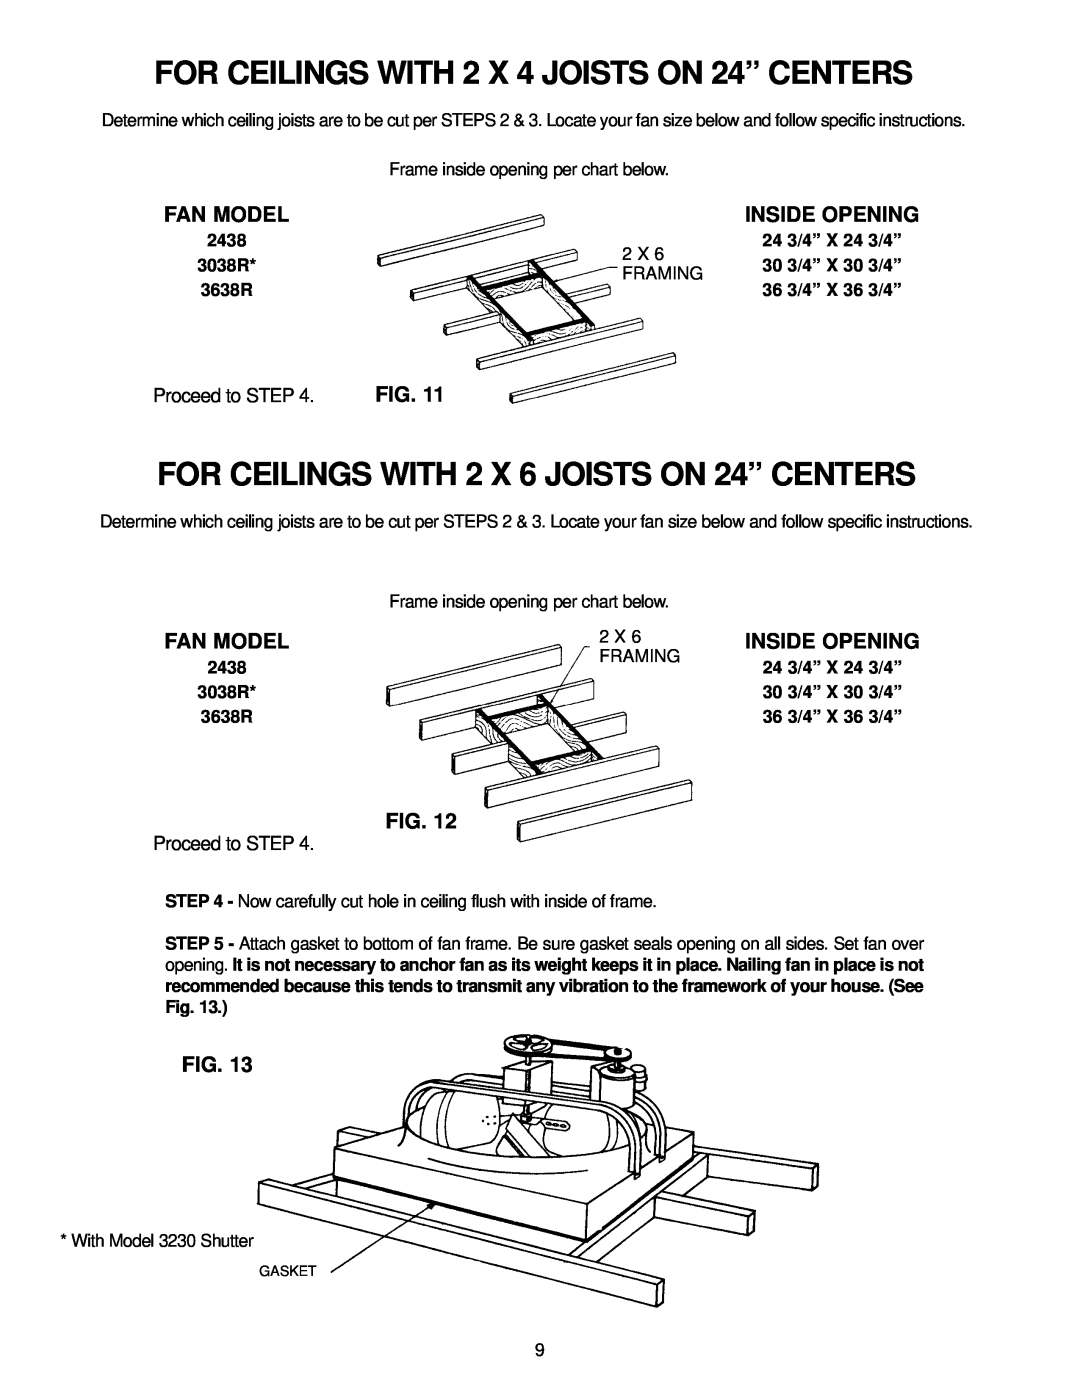 Marley Engineered Products 3638R FOR CEILINGS WITH 2 X 4 JOISTS ON 24” CENTERS, Fan Model, Inside Opening, Proceed to STEP 